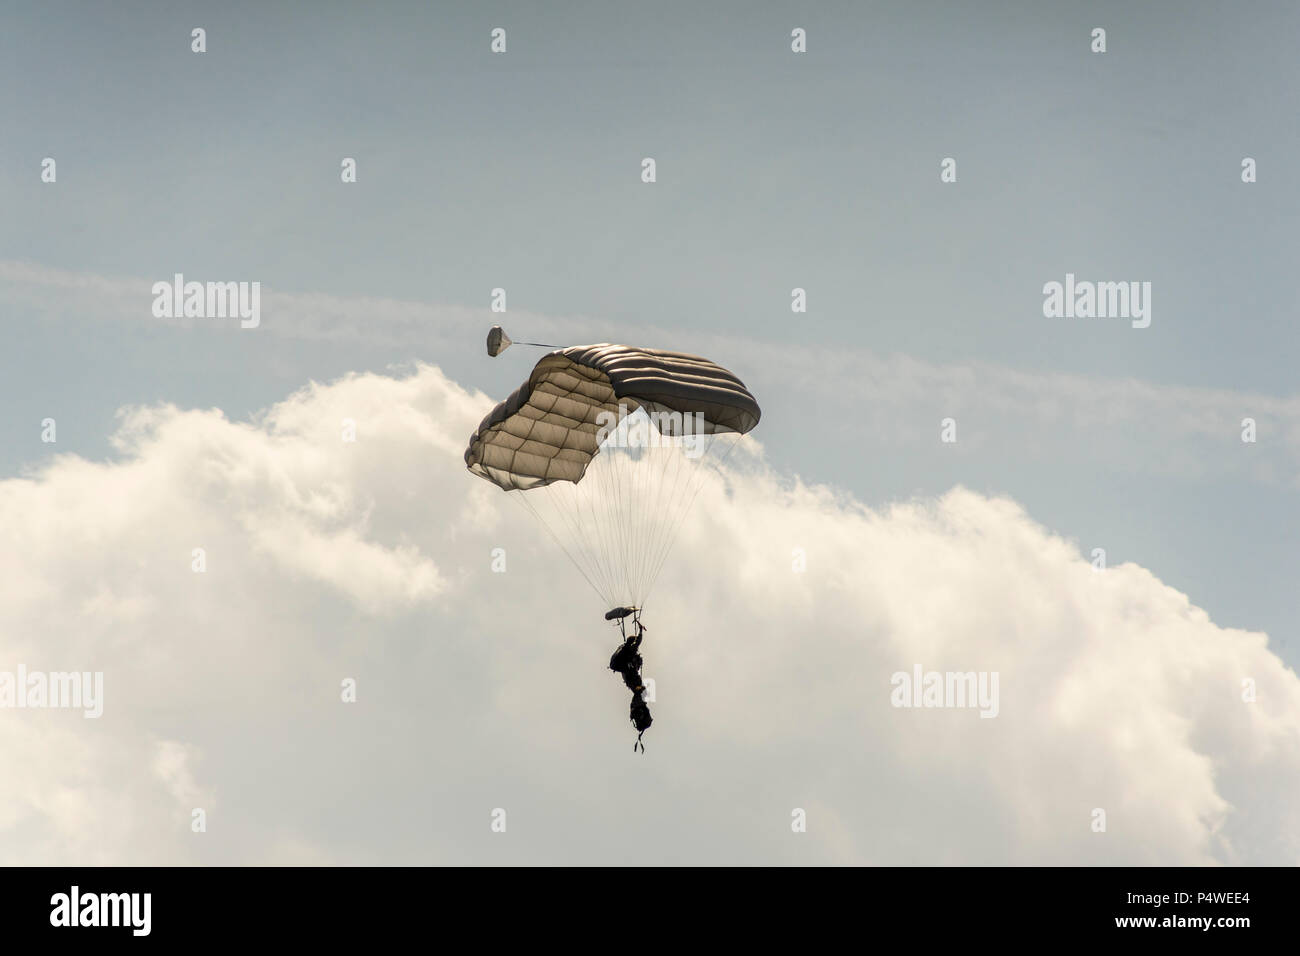 Paratroopers demonstrating their skills at the International Aerospace Exhibition ILA at Airport Schoenefeld in Berlin, Germany 2018. Stock Photo